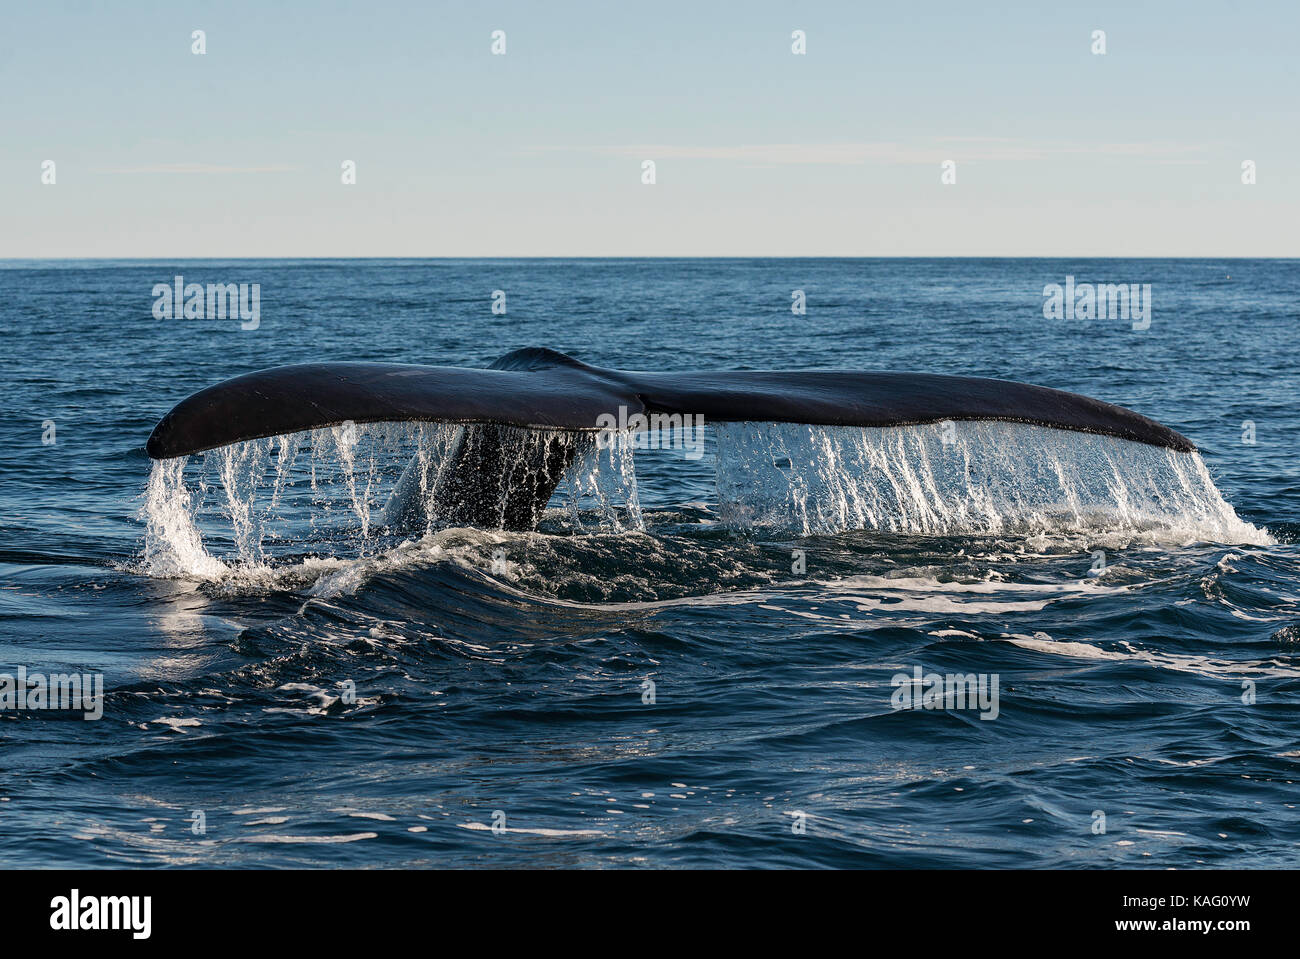 Close up view of a southern right whale tail fluke, Valdes Peninsula, Patagonia, Argentina. Stock Photo